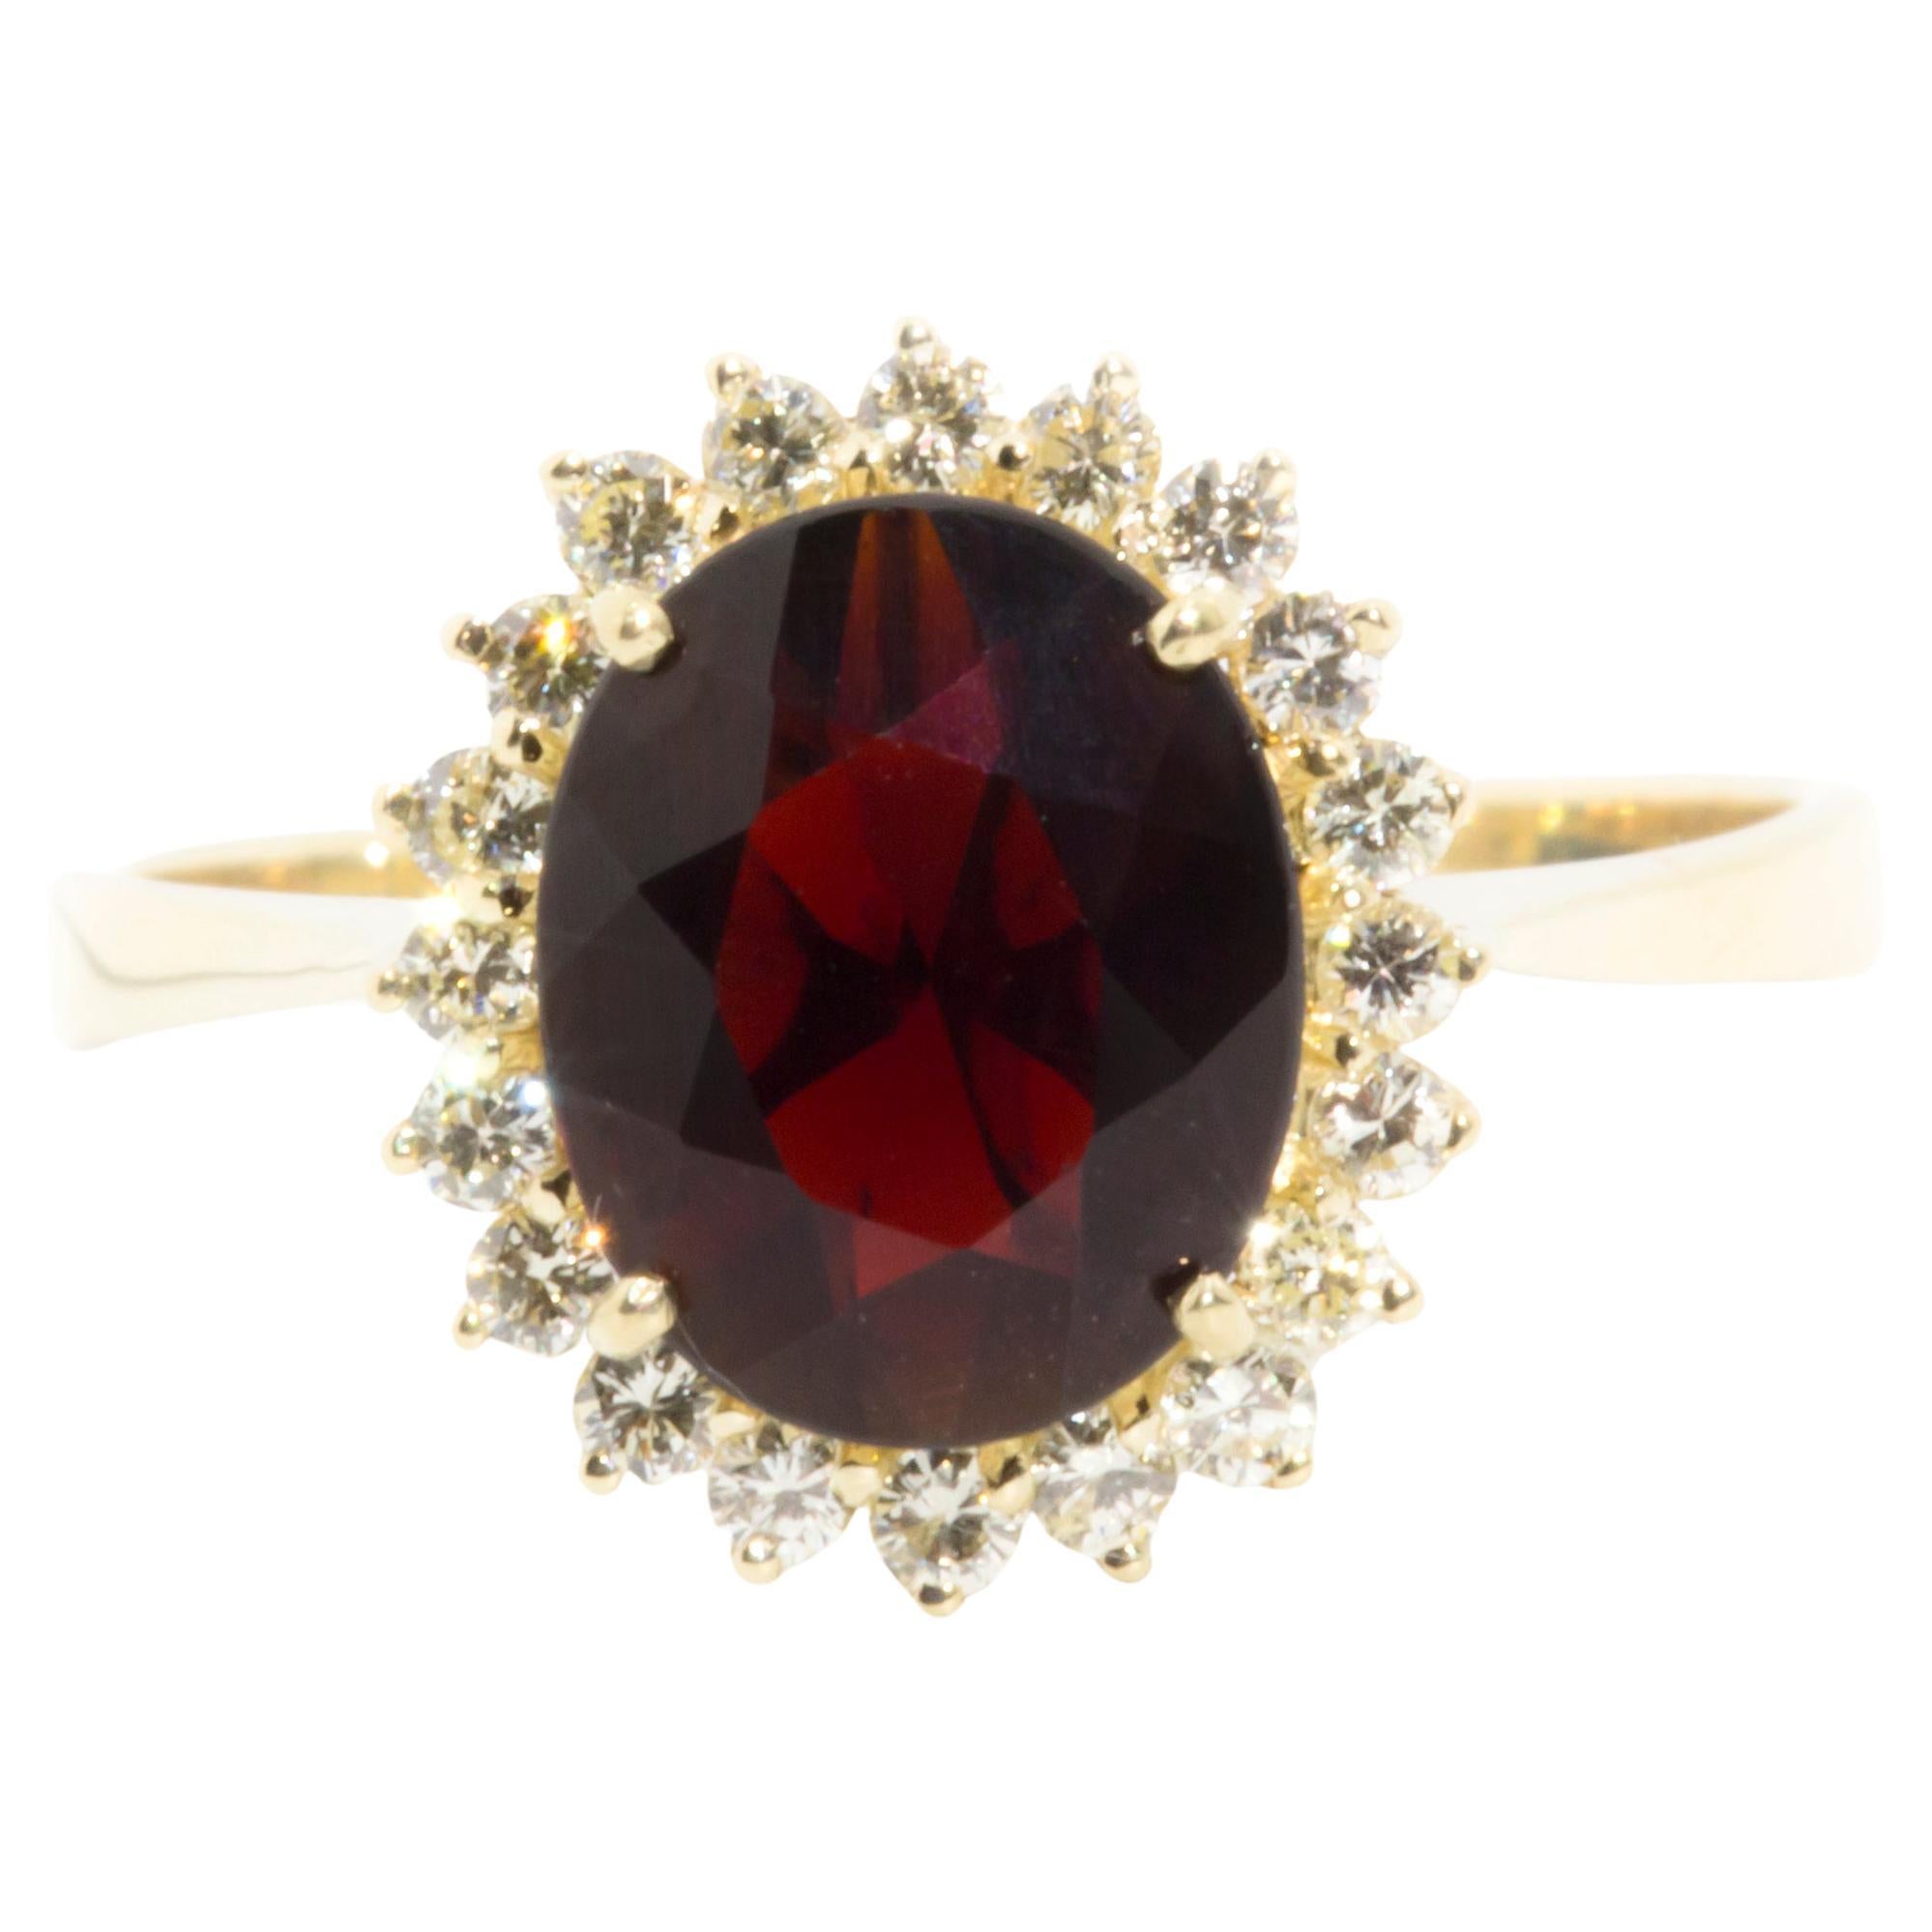 Oval Red Garnet and Diamond Vintage Halo Cluster Ring in 14 Carat Yellow Gold